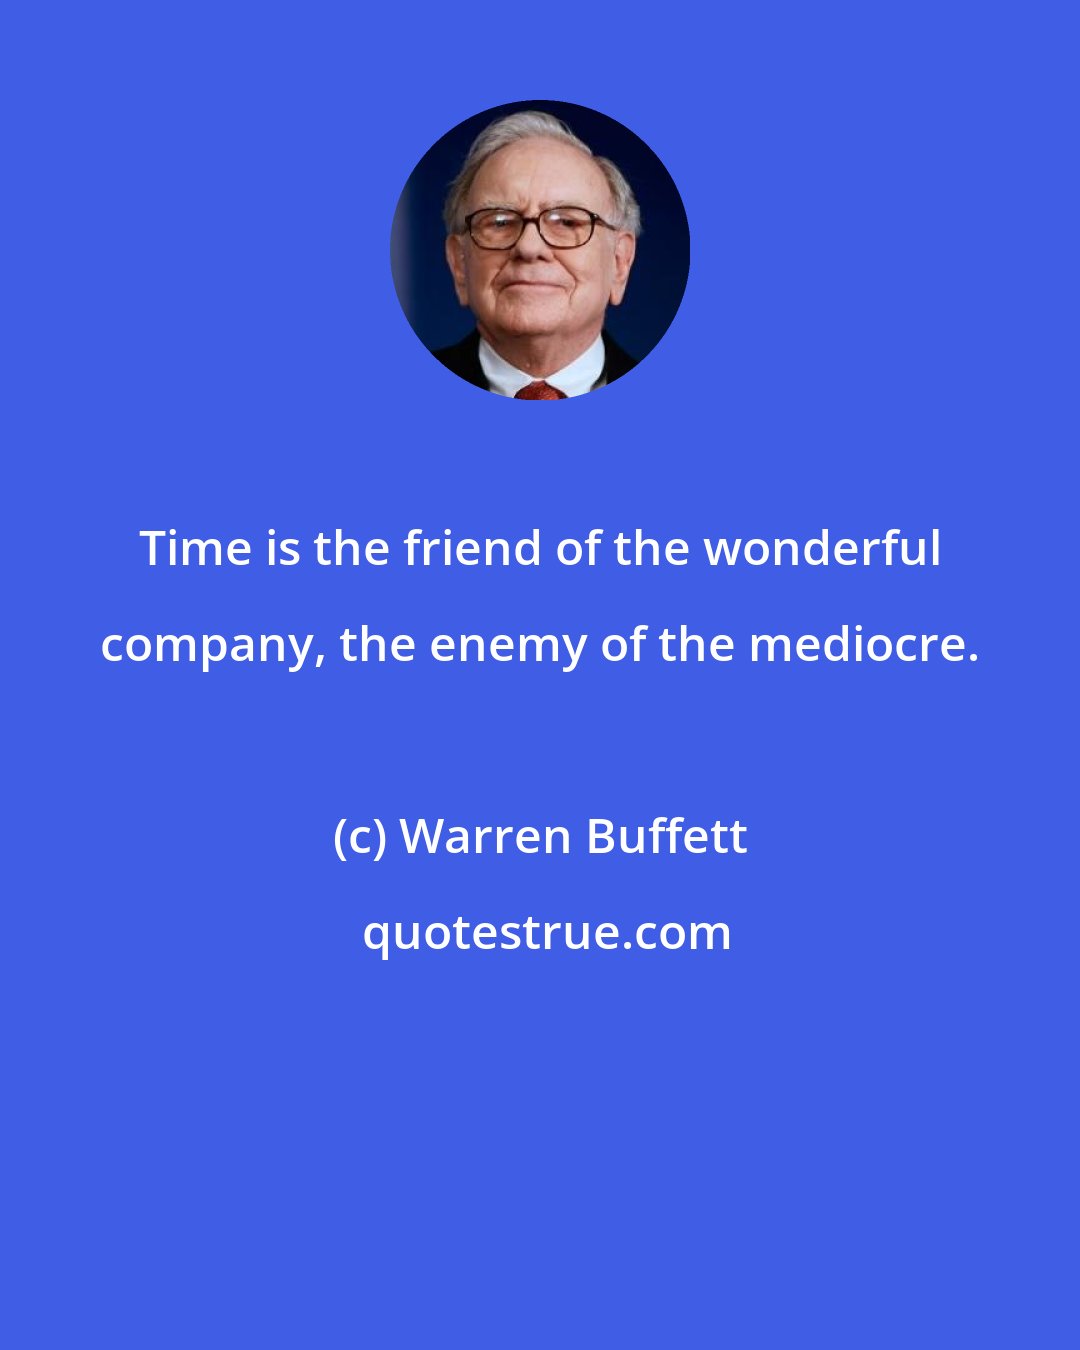 Warren Buffett: Time is the friend of the wonderful company, the enemy of the mediocre.